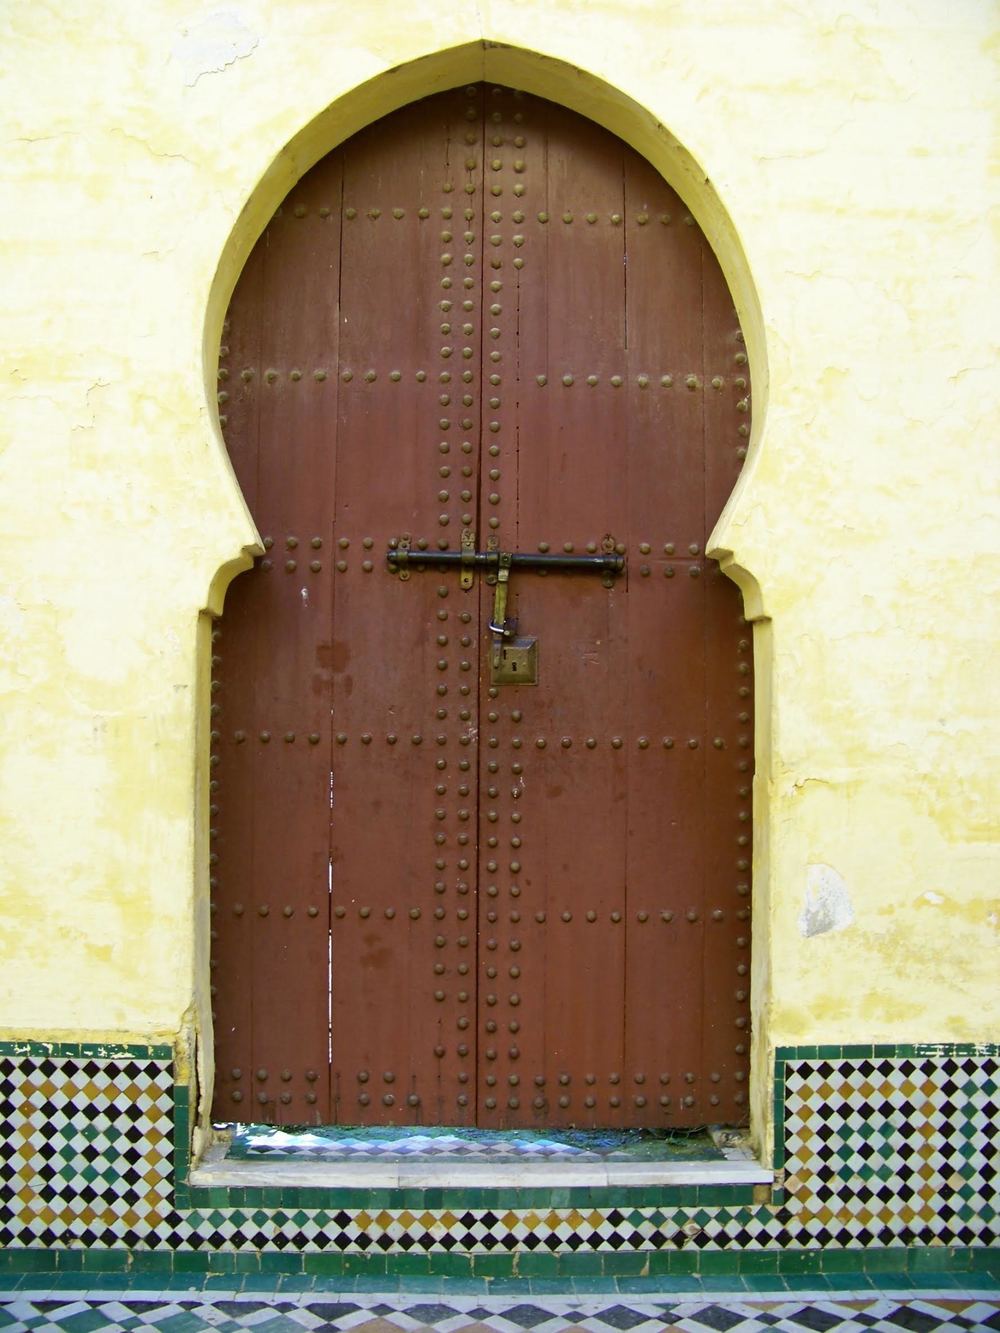  Something old - an old door; this one is from Moulay Ismail's tomb, I believe.&nbsp;  Photo by Celene Barrera 